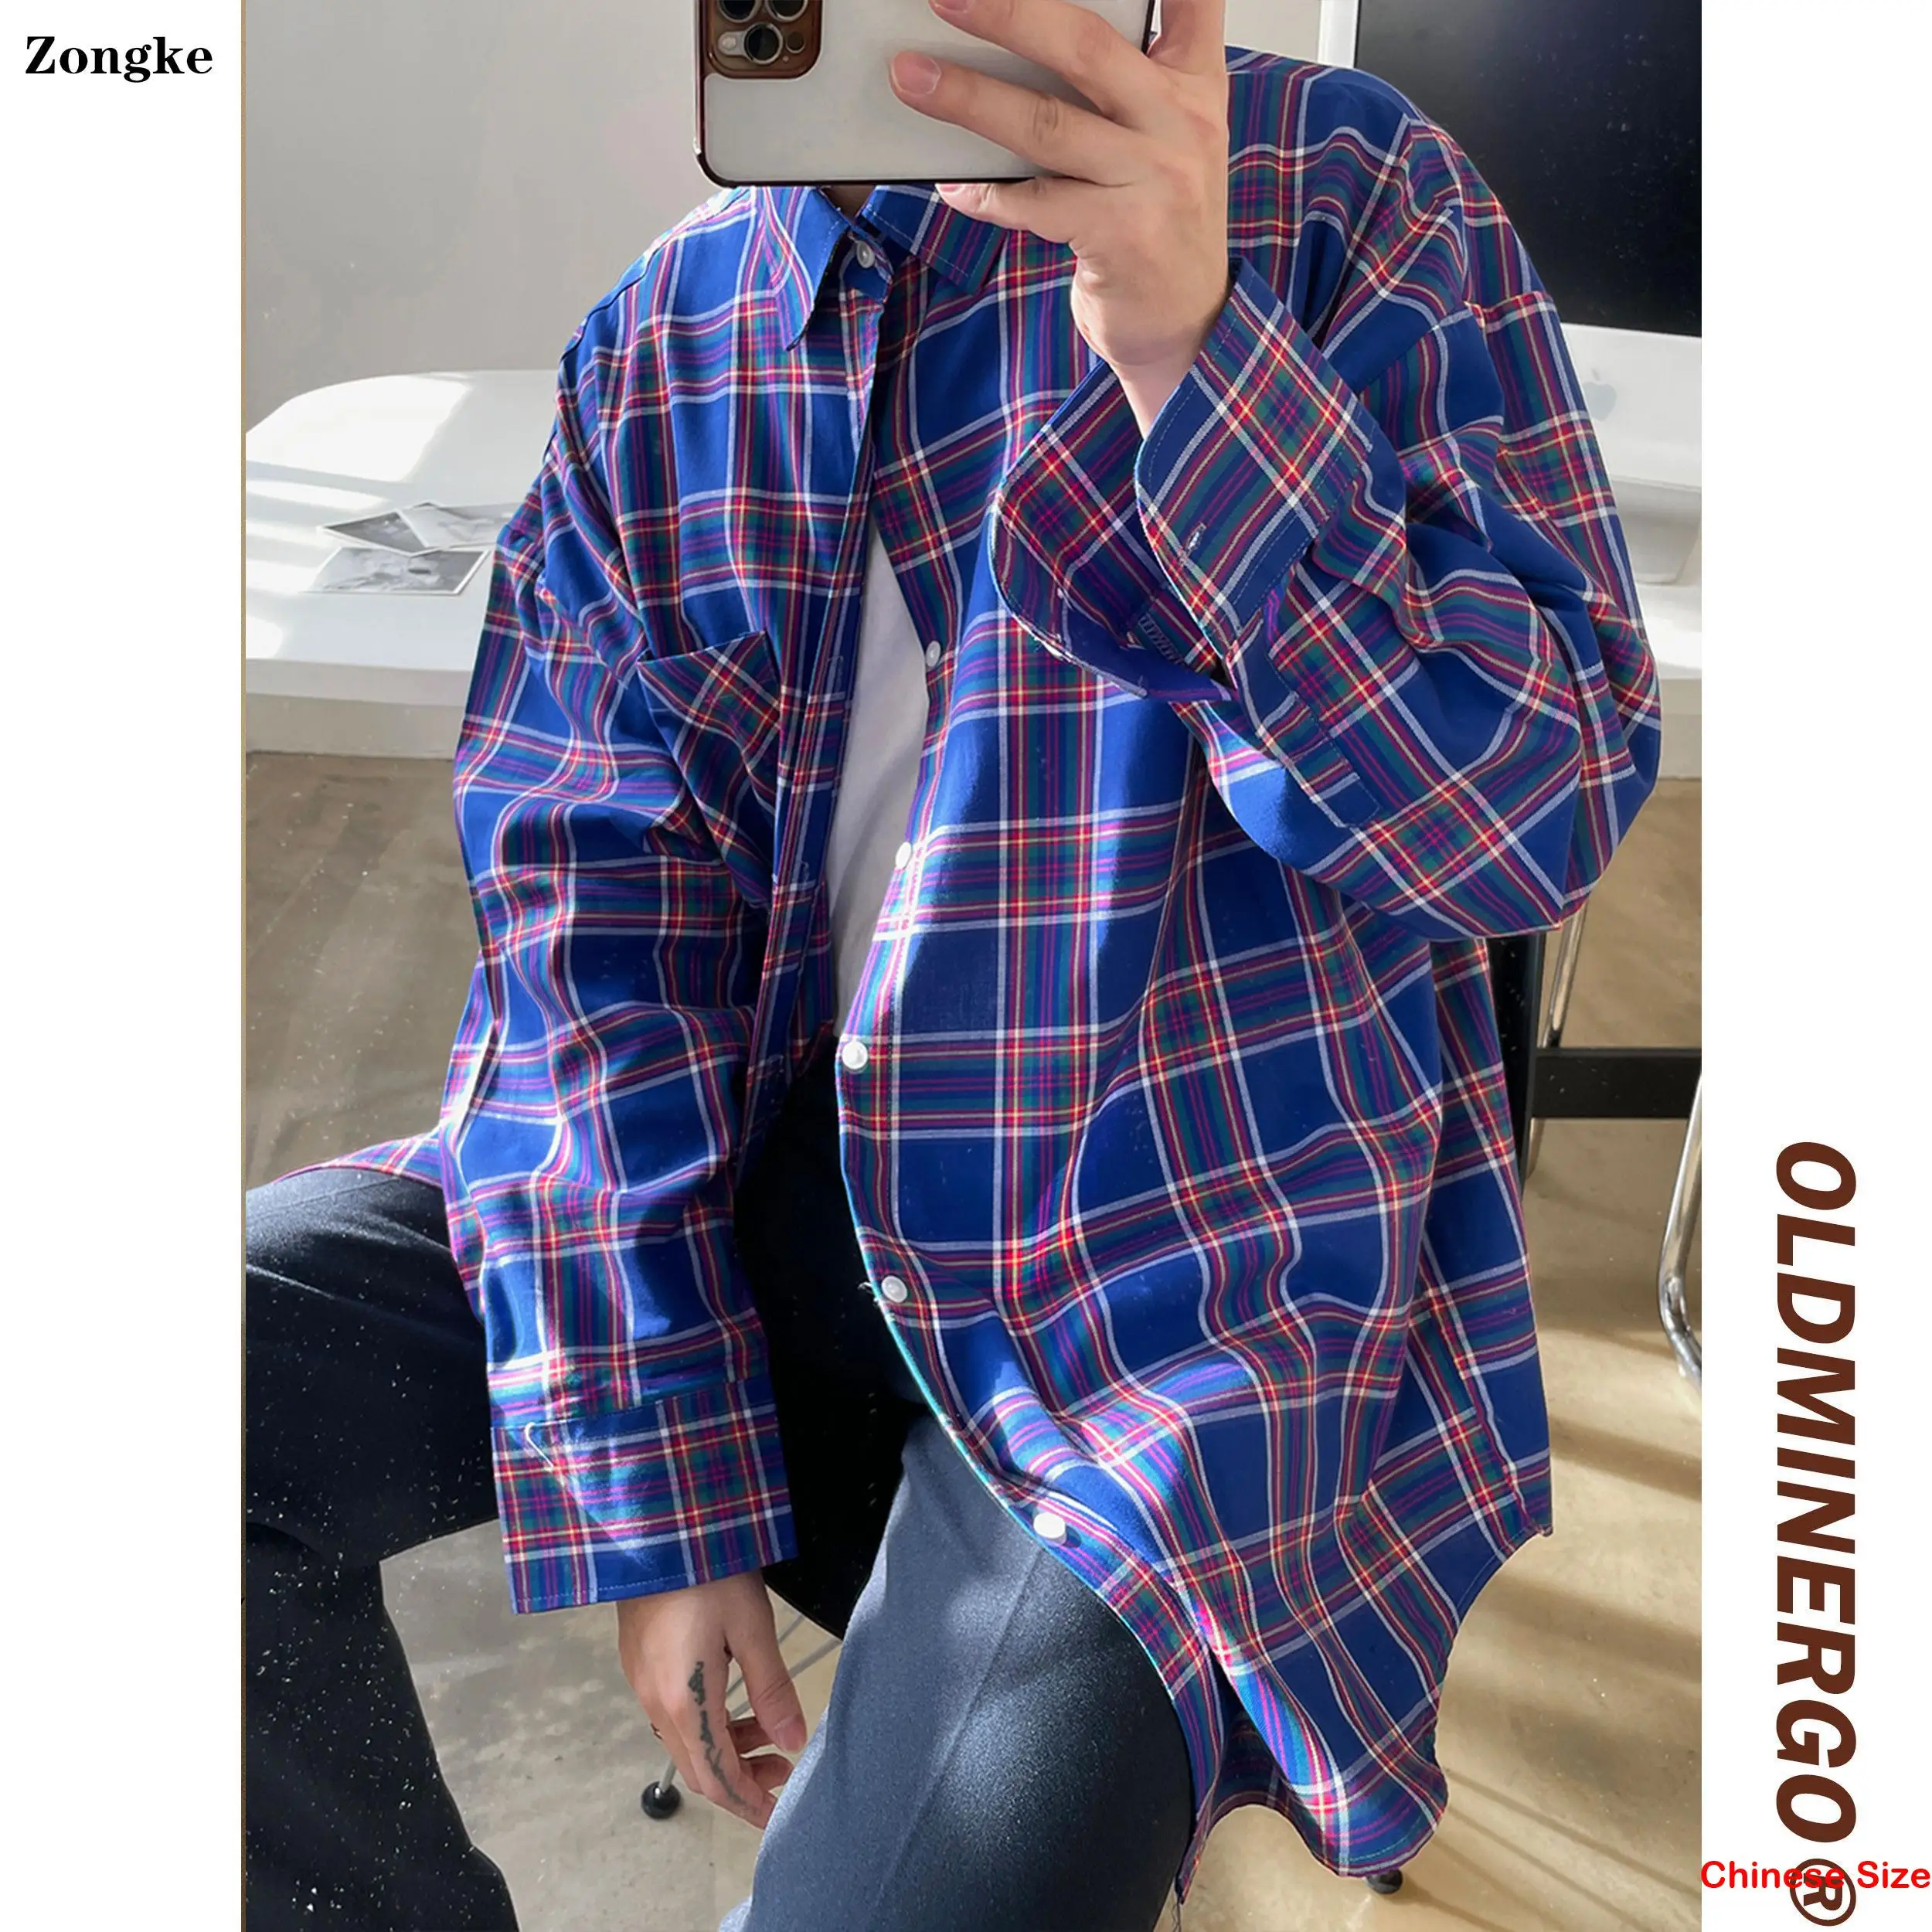 

Zongke Plaid Casual Shirt For Mens Clothing Free Shipping Items For Men Long Sleeve Shirt Chinese Size 2XL 2023 Spring New